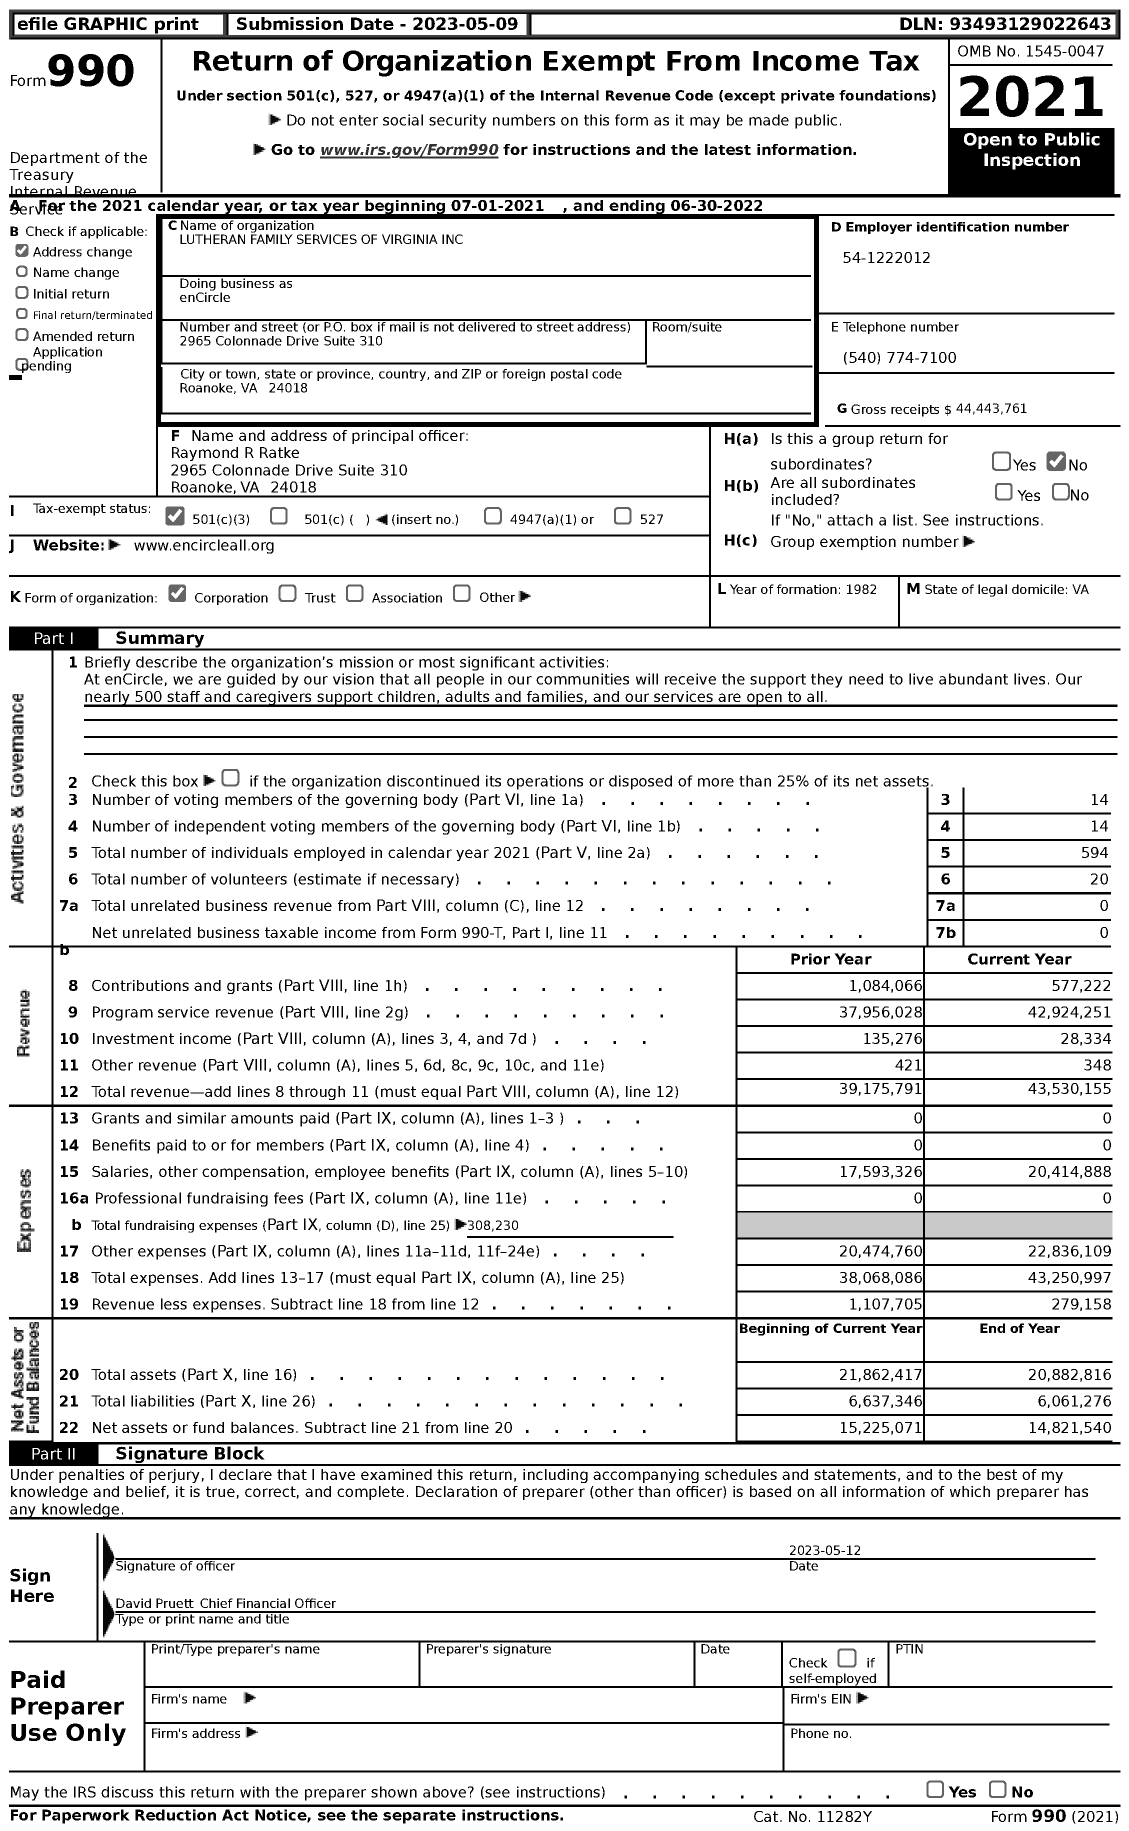 Image of first page of 2021 Form 990 for enCircle / Lutheran Family Services of Virginia Inc